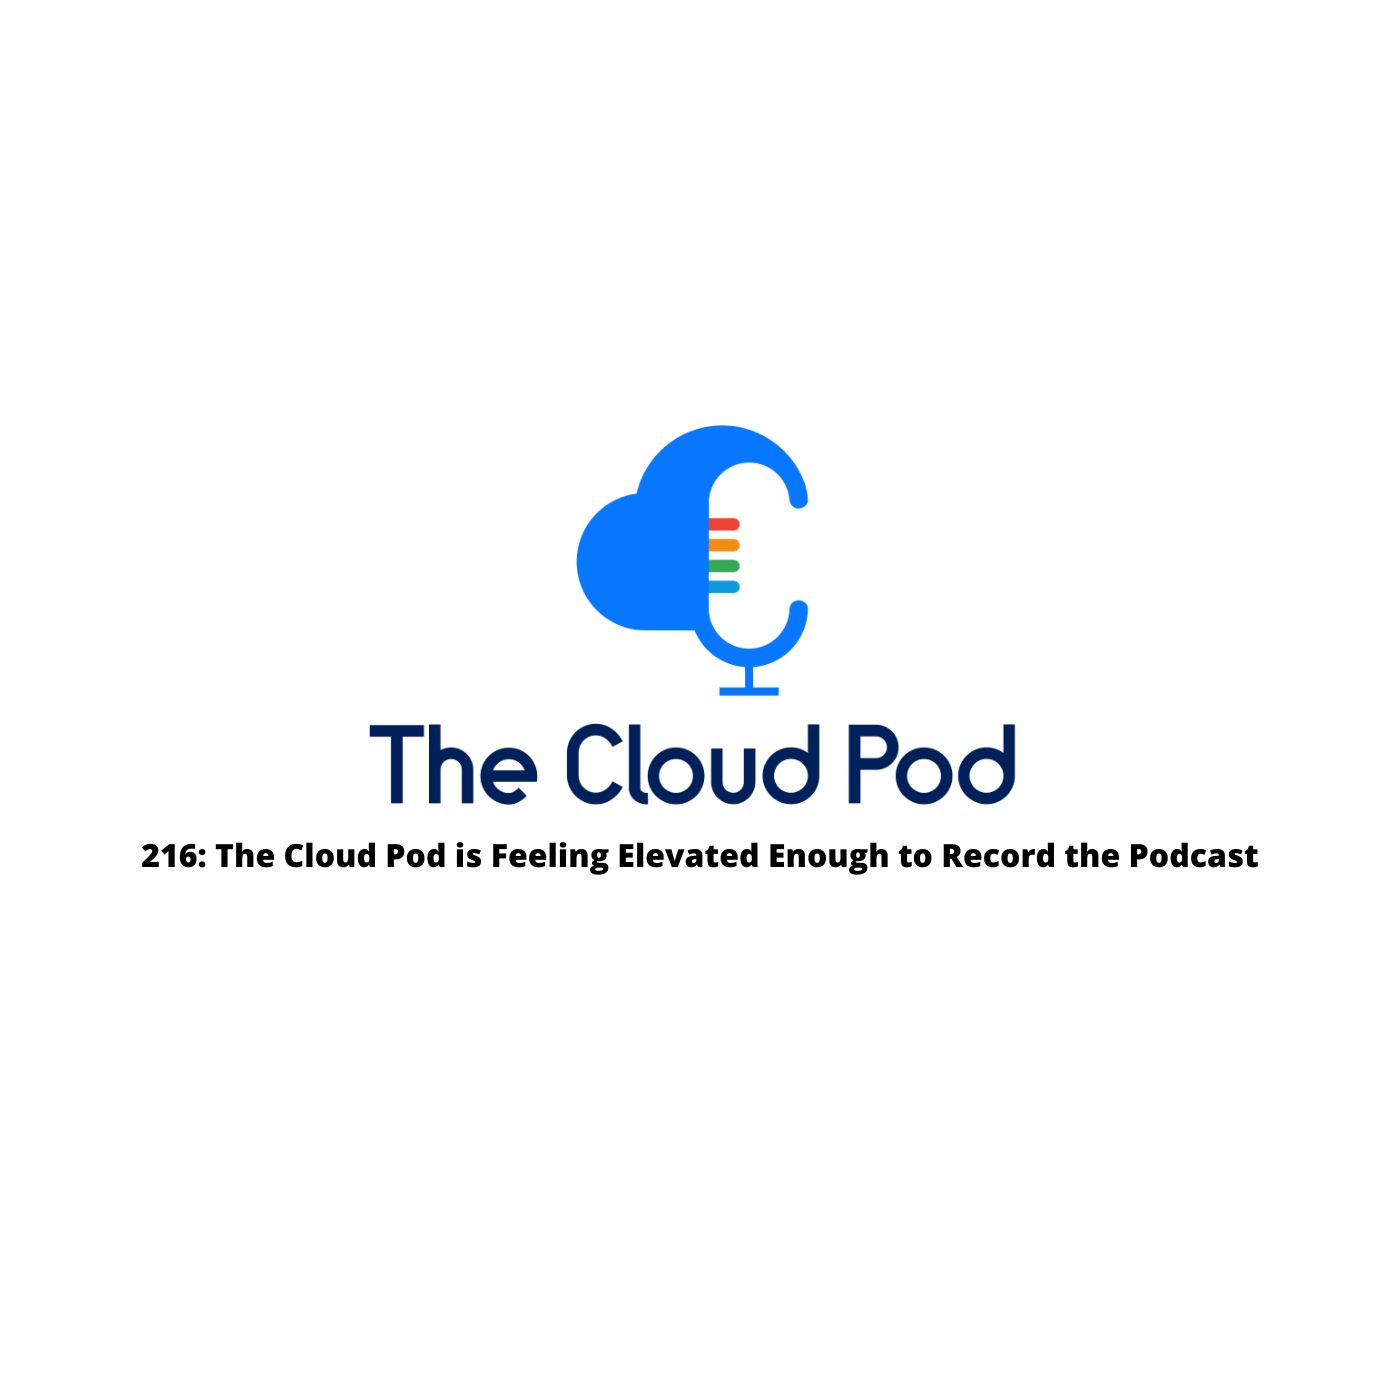 216: The Cloud Pod is Feeling Elevated Enough to Record the Podcast